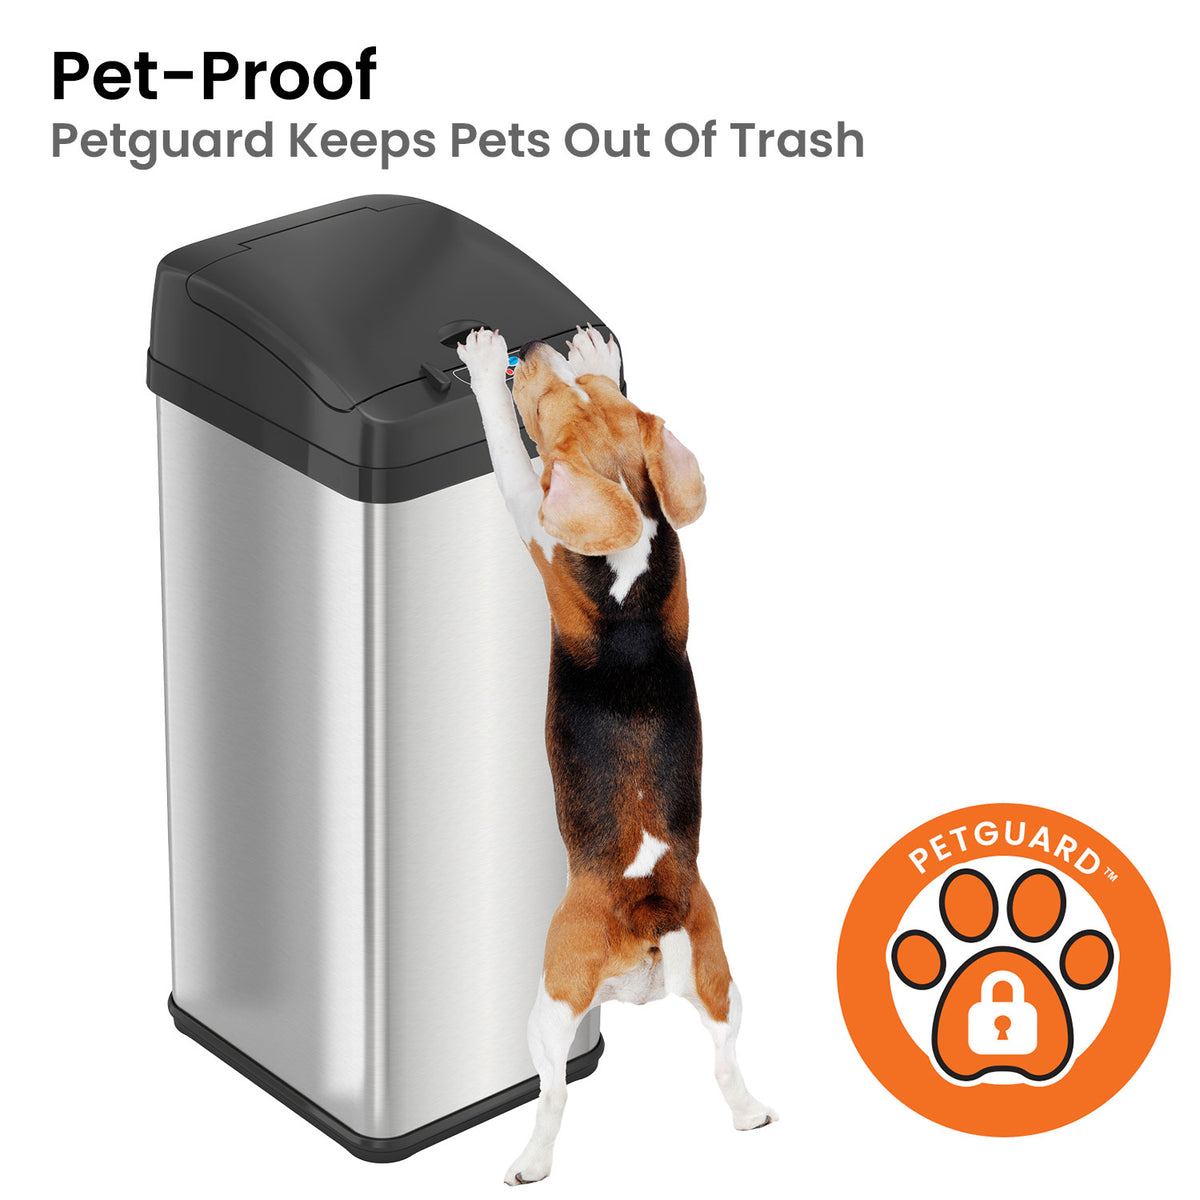 iTouchless Stainless Steel Trash Can with Pet-Proof Lid PetGuard keeps pets out of trash